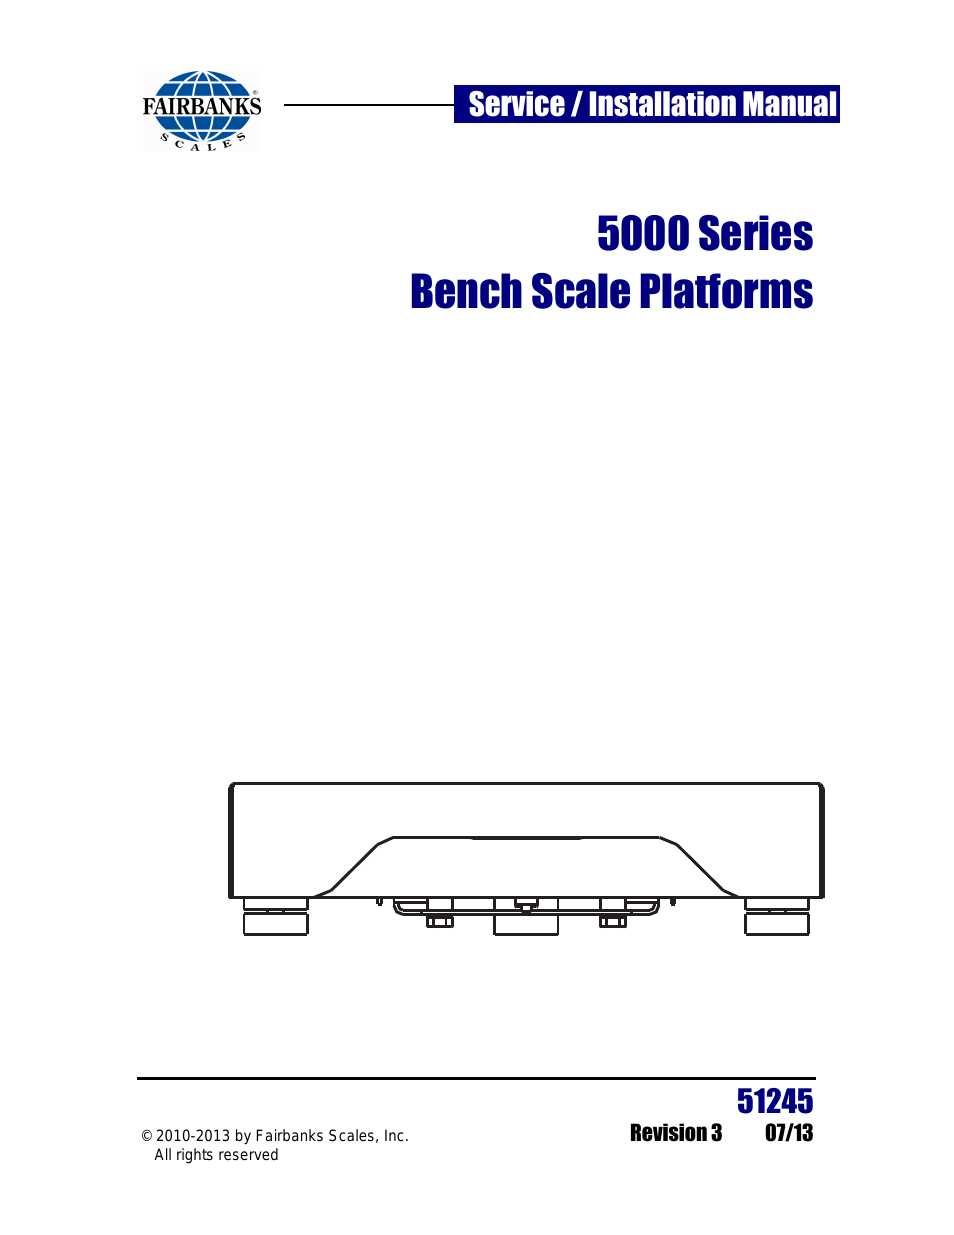 5000 Series Bench Scale Platforms